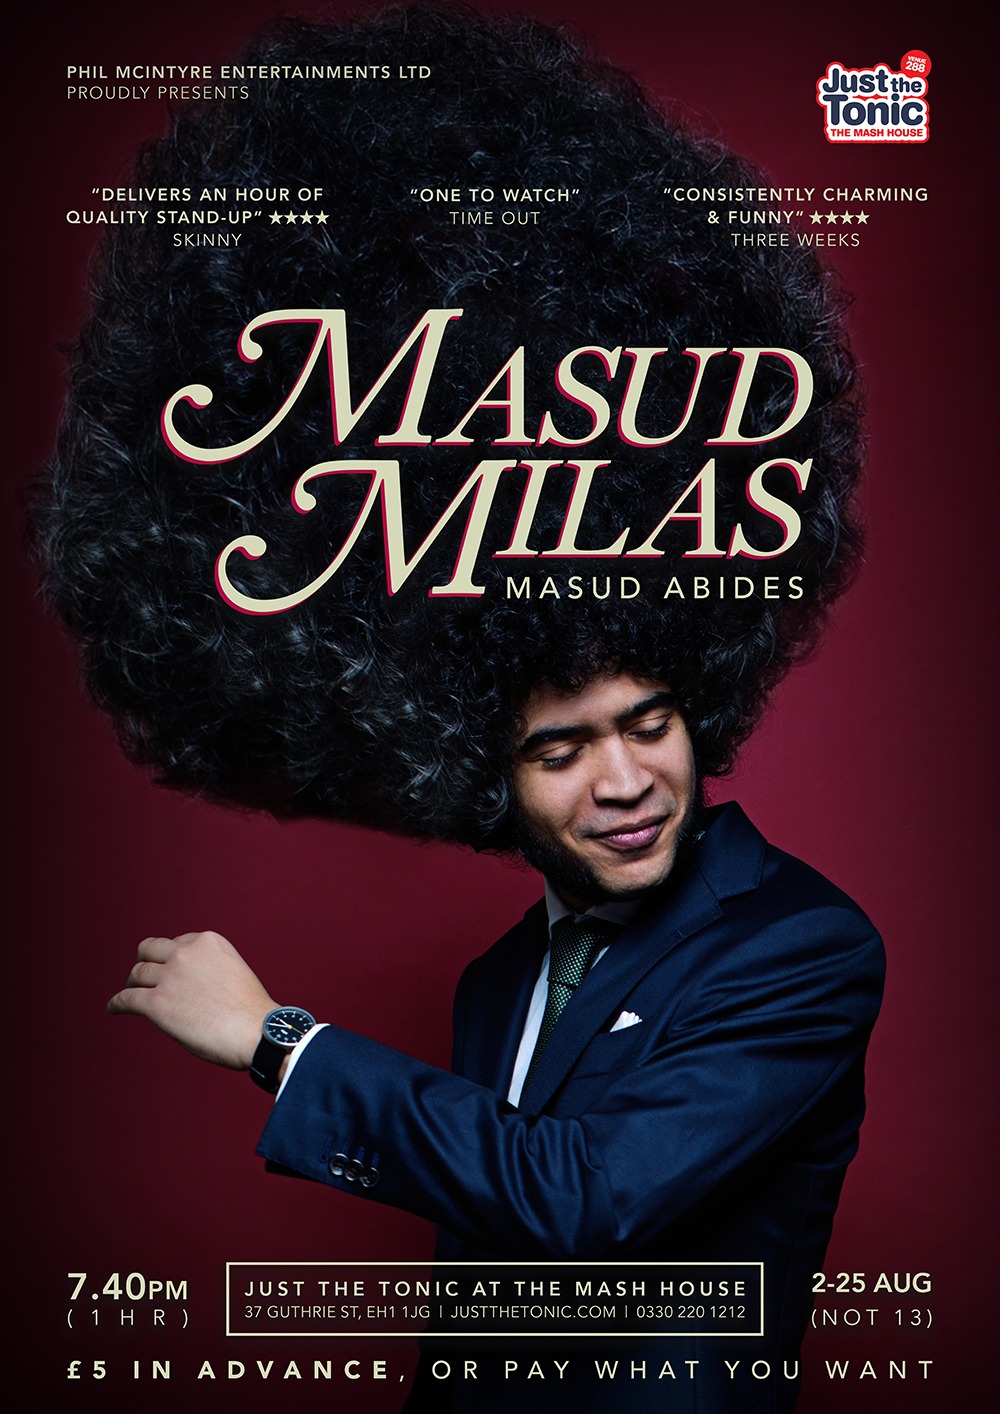 The poster for Masud Milas: Masud Abides